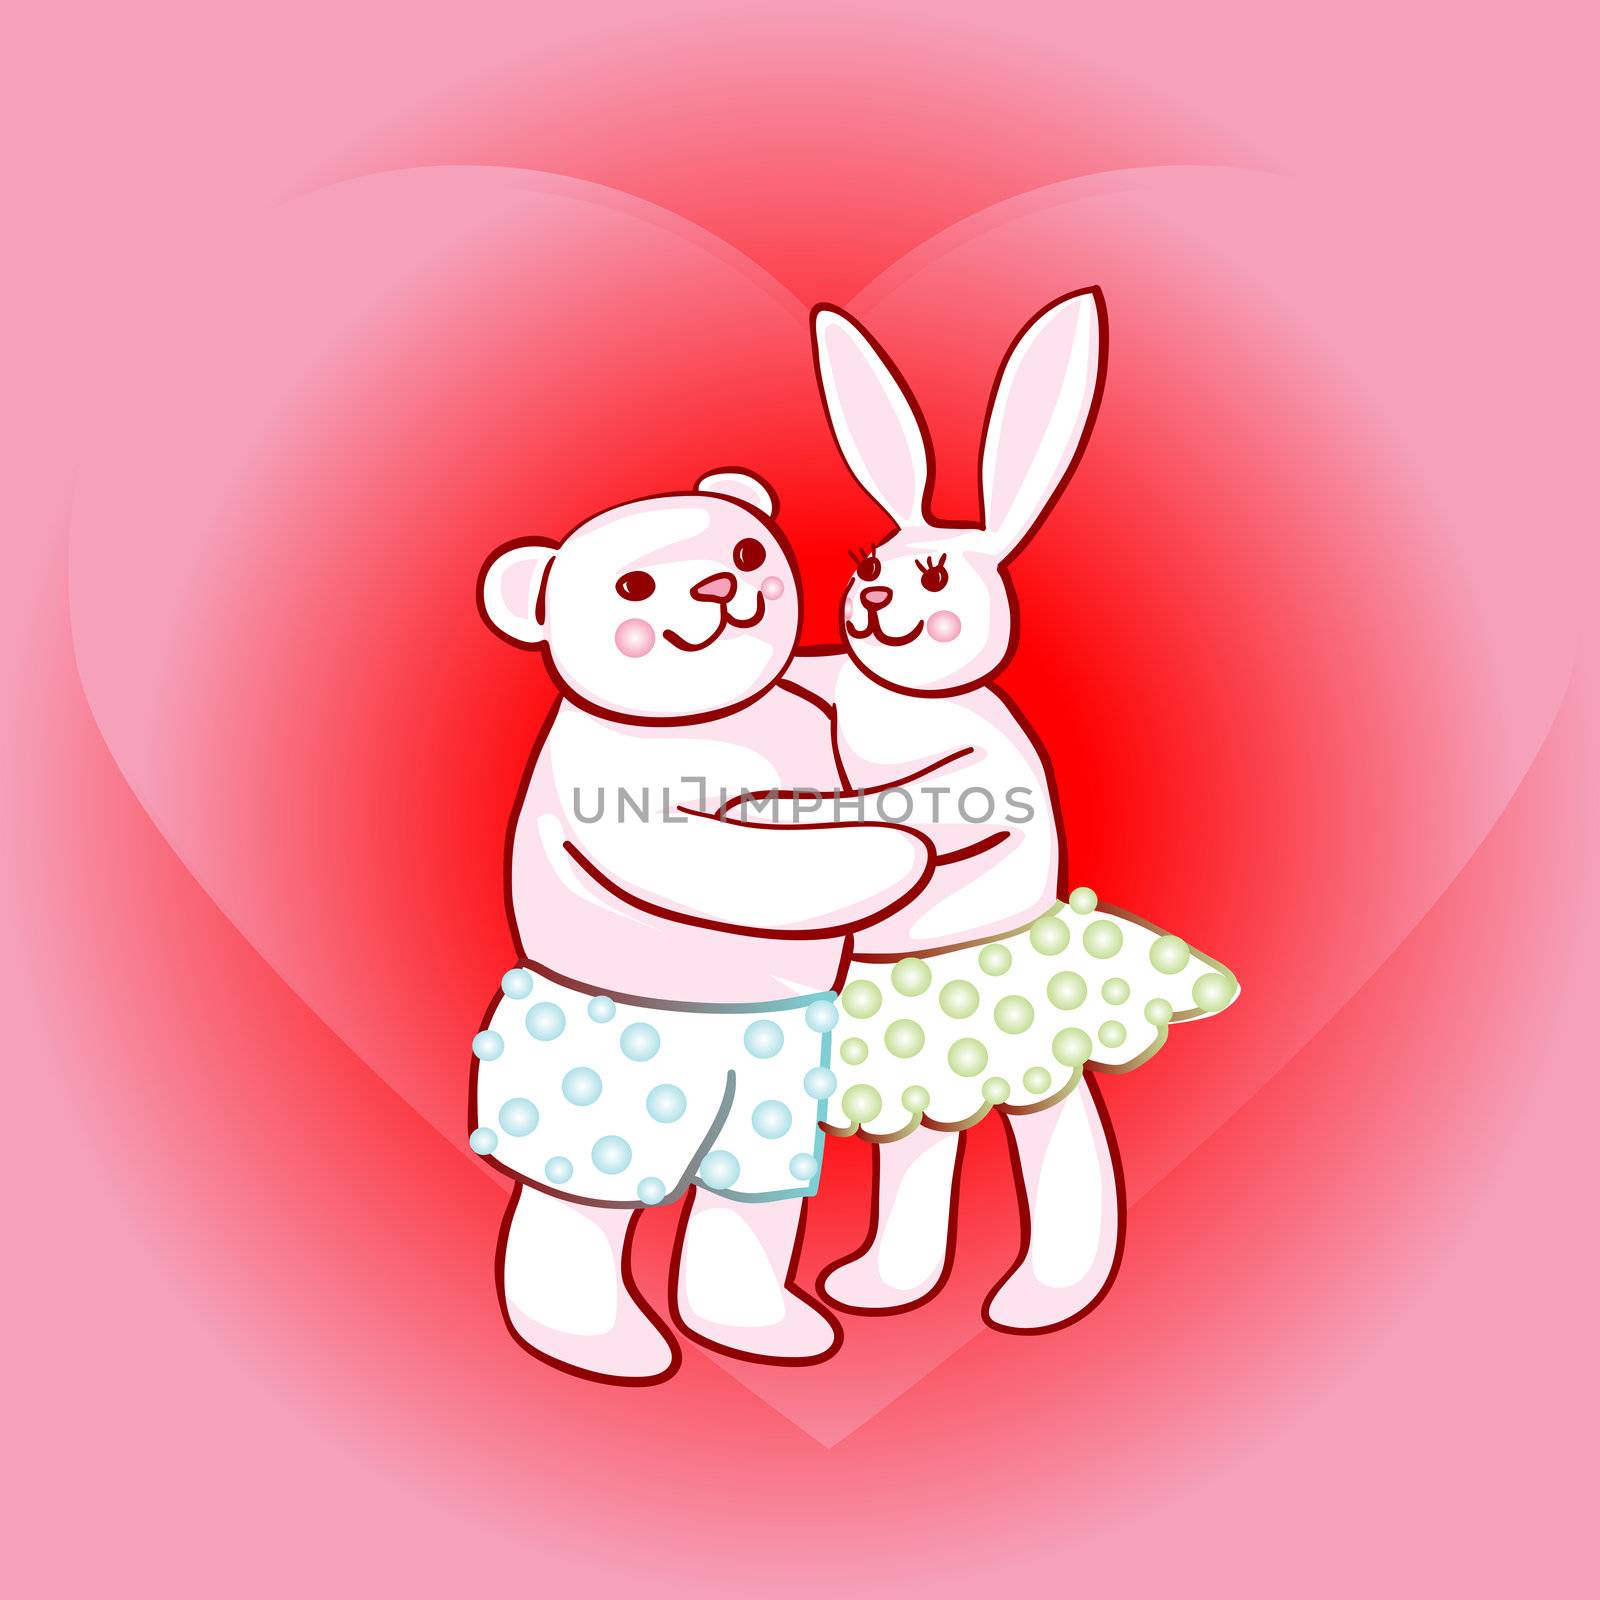 Valentine's Day cand with bunny and teddy bear in love, doodle drawings over happiness heart 